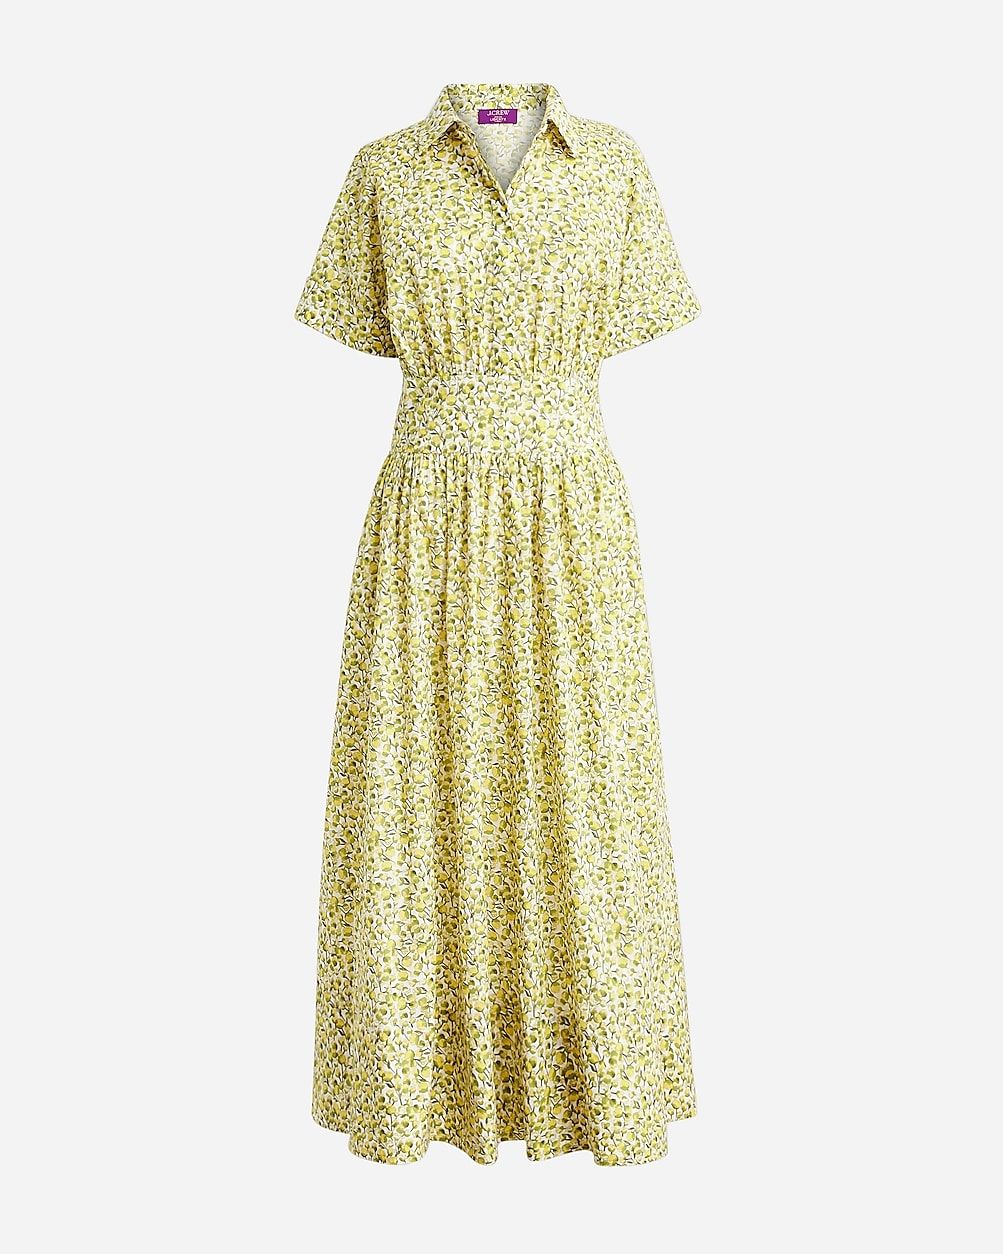 Fitted-waist shirtdress in Liberty® fabric | J.Crew US